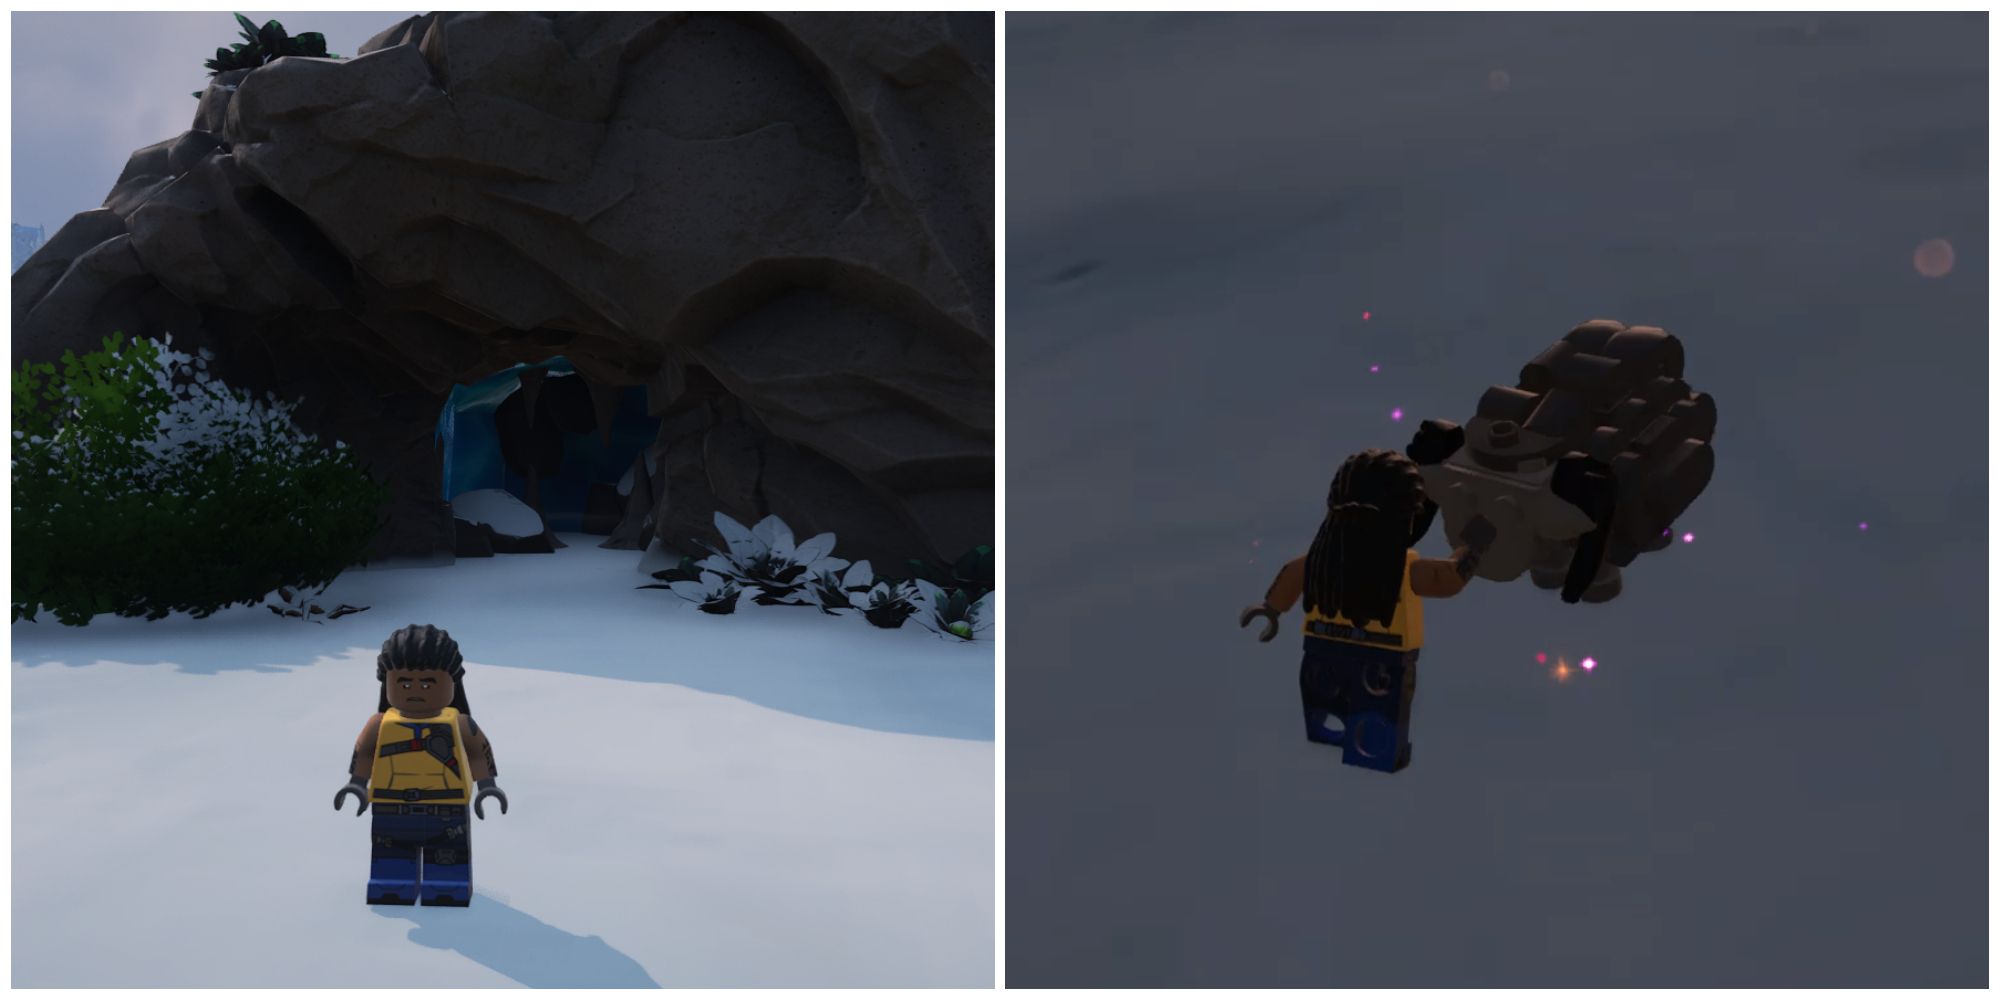 Split image of a character in front of a cave and a character petting a sheep in Lego Fortnite